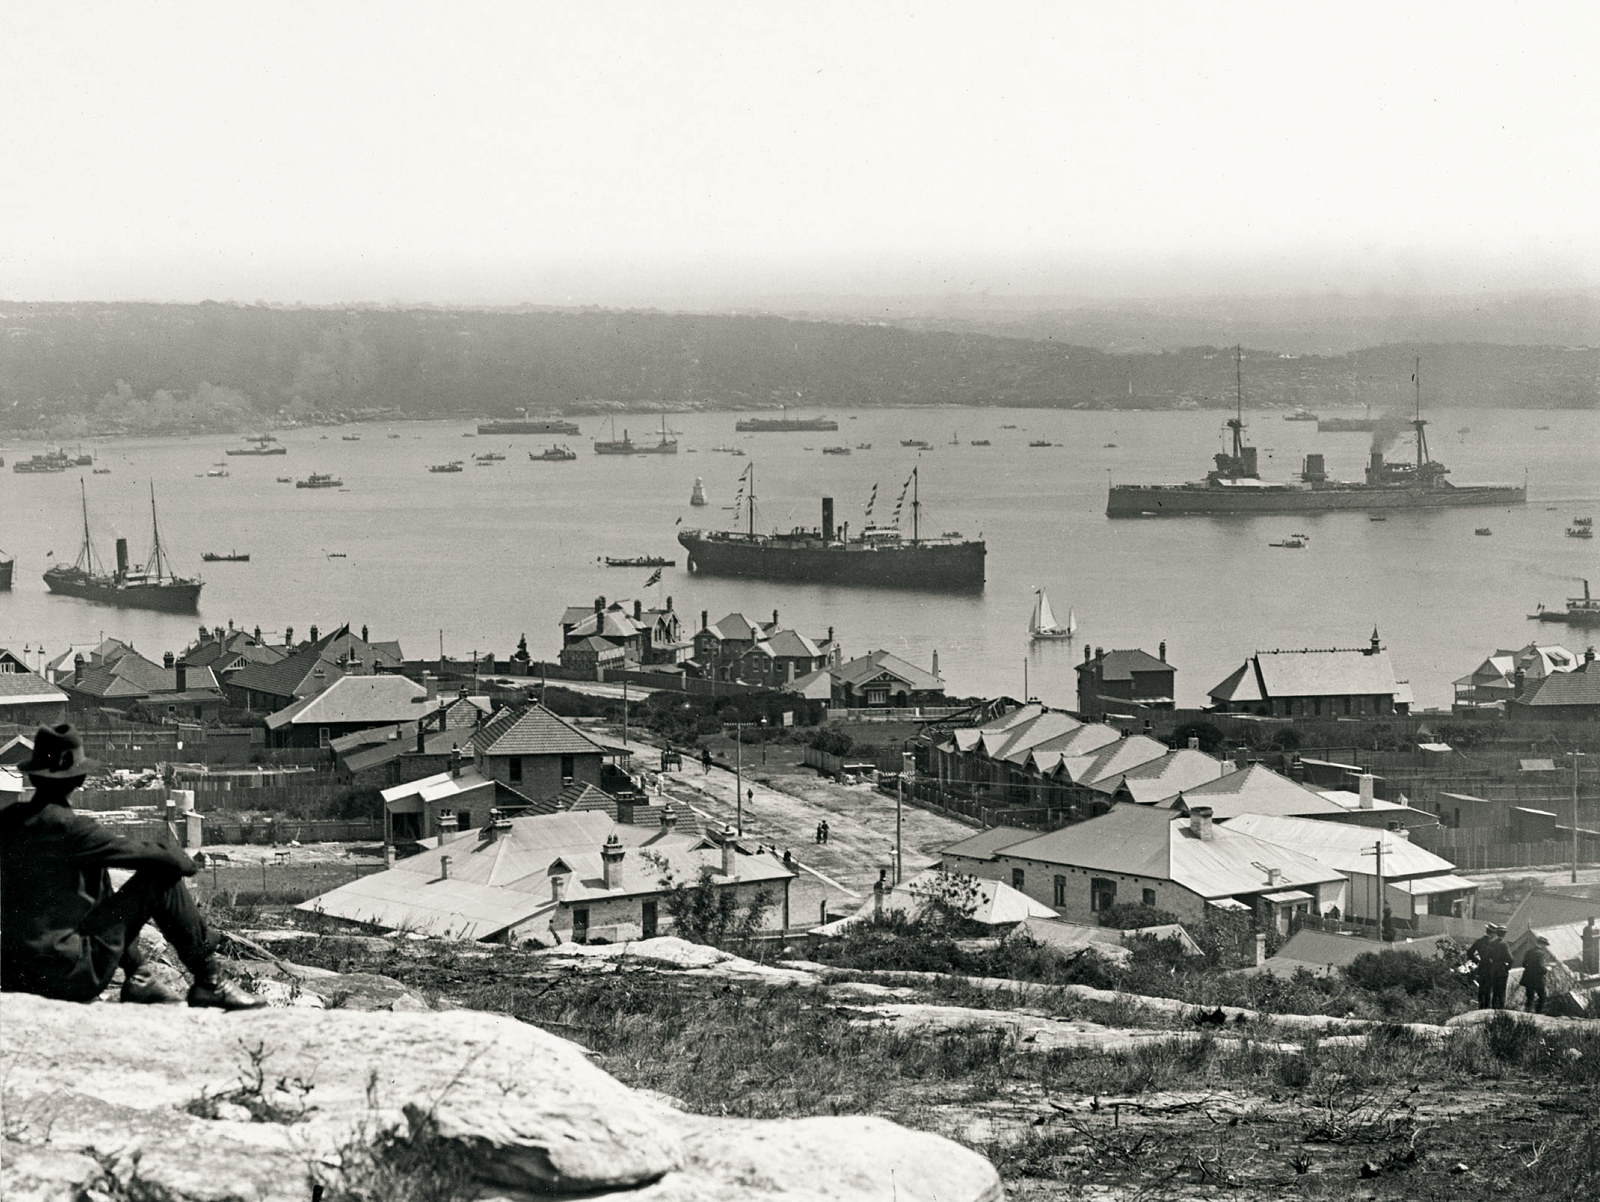 Black and white photograph showing view of harbour with ships with rocks in foreground.